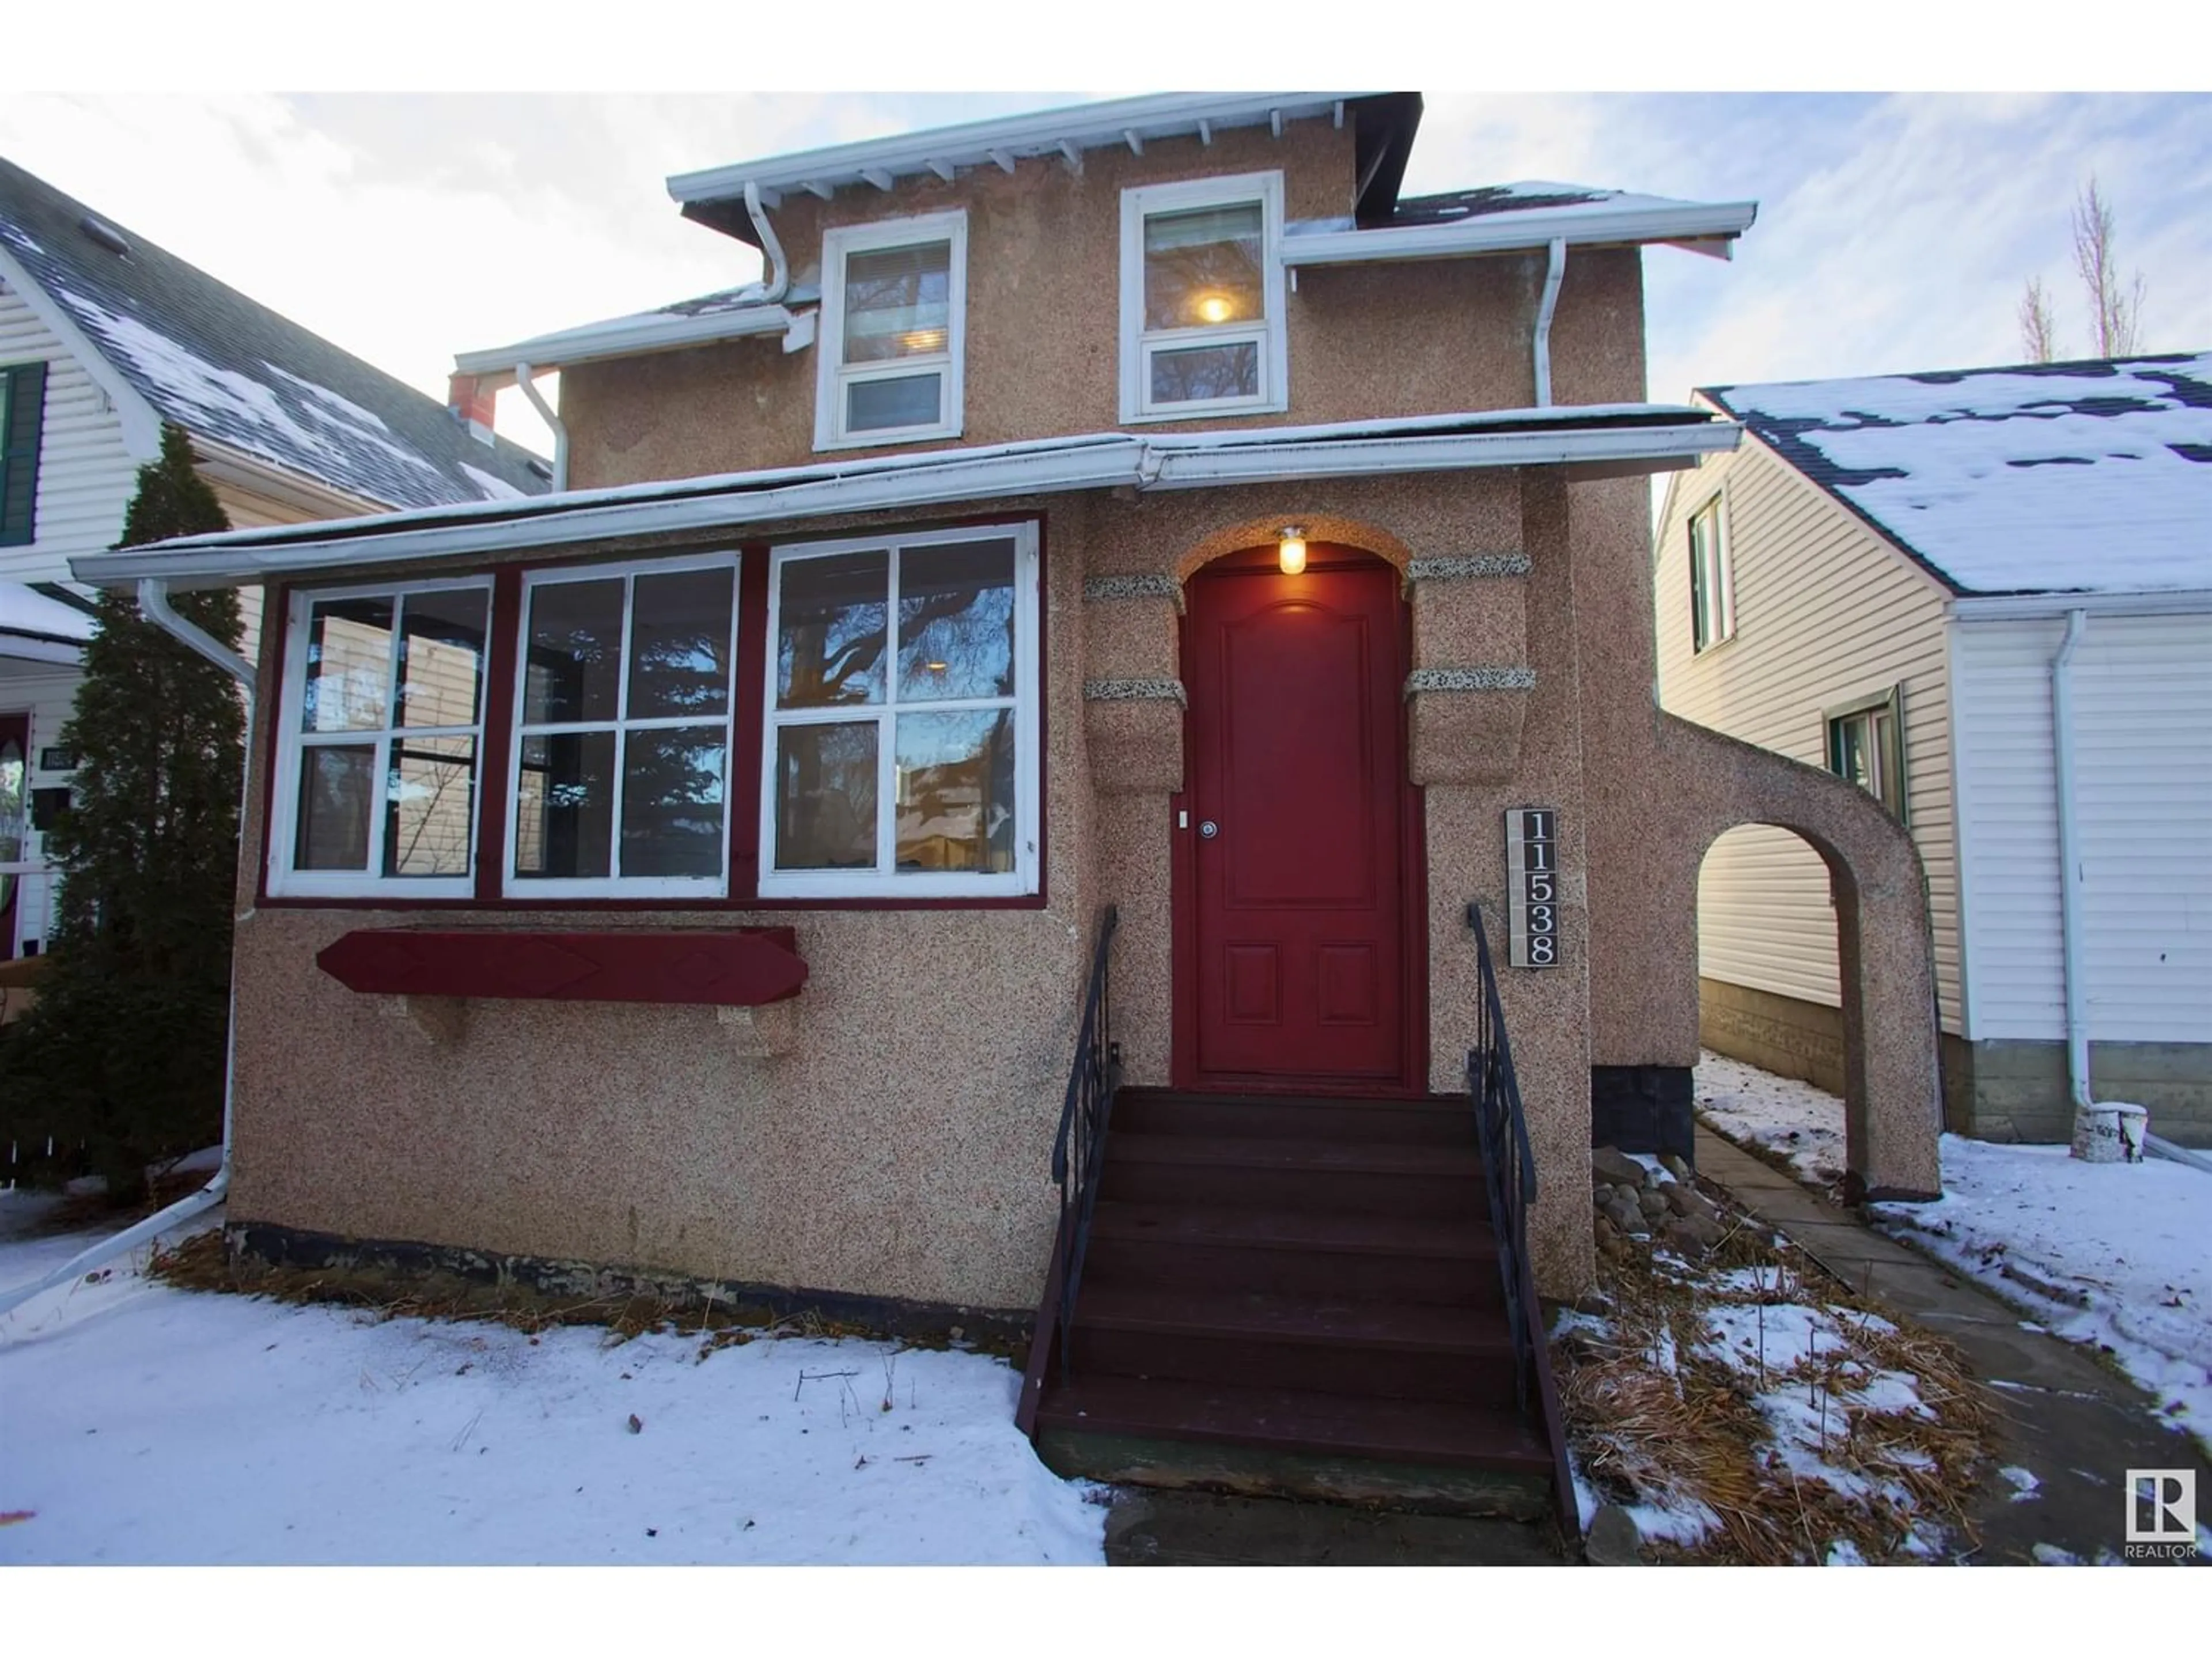 Frontside or backside of a home for 11538 89 ST NW, Edmonton Alberta T5B3T9